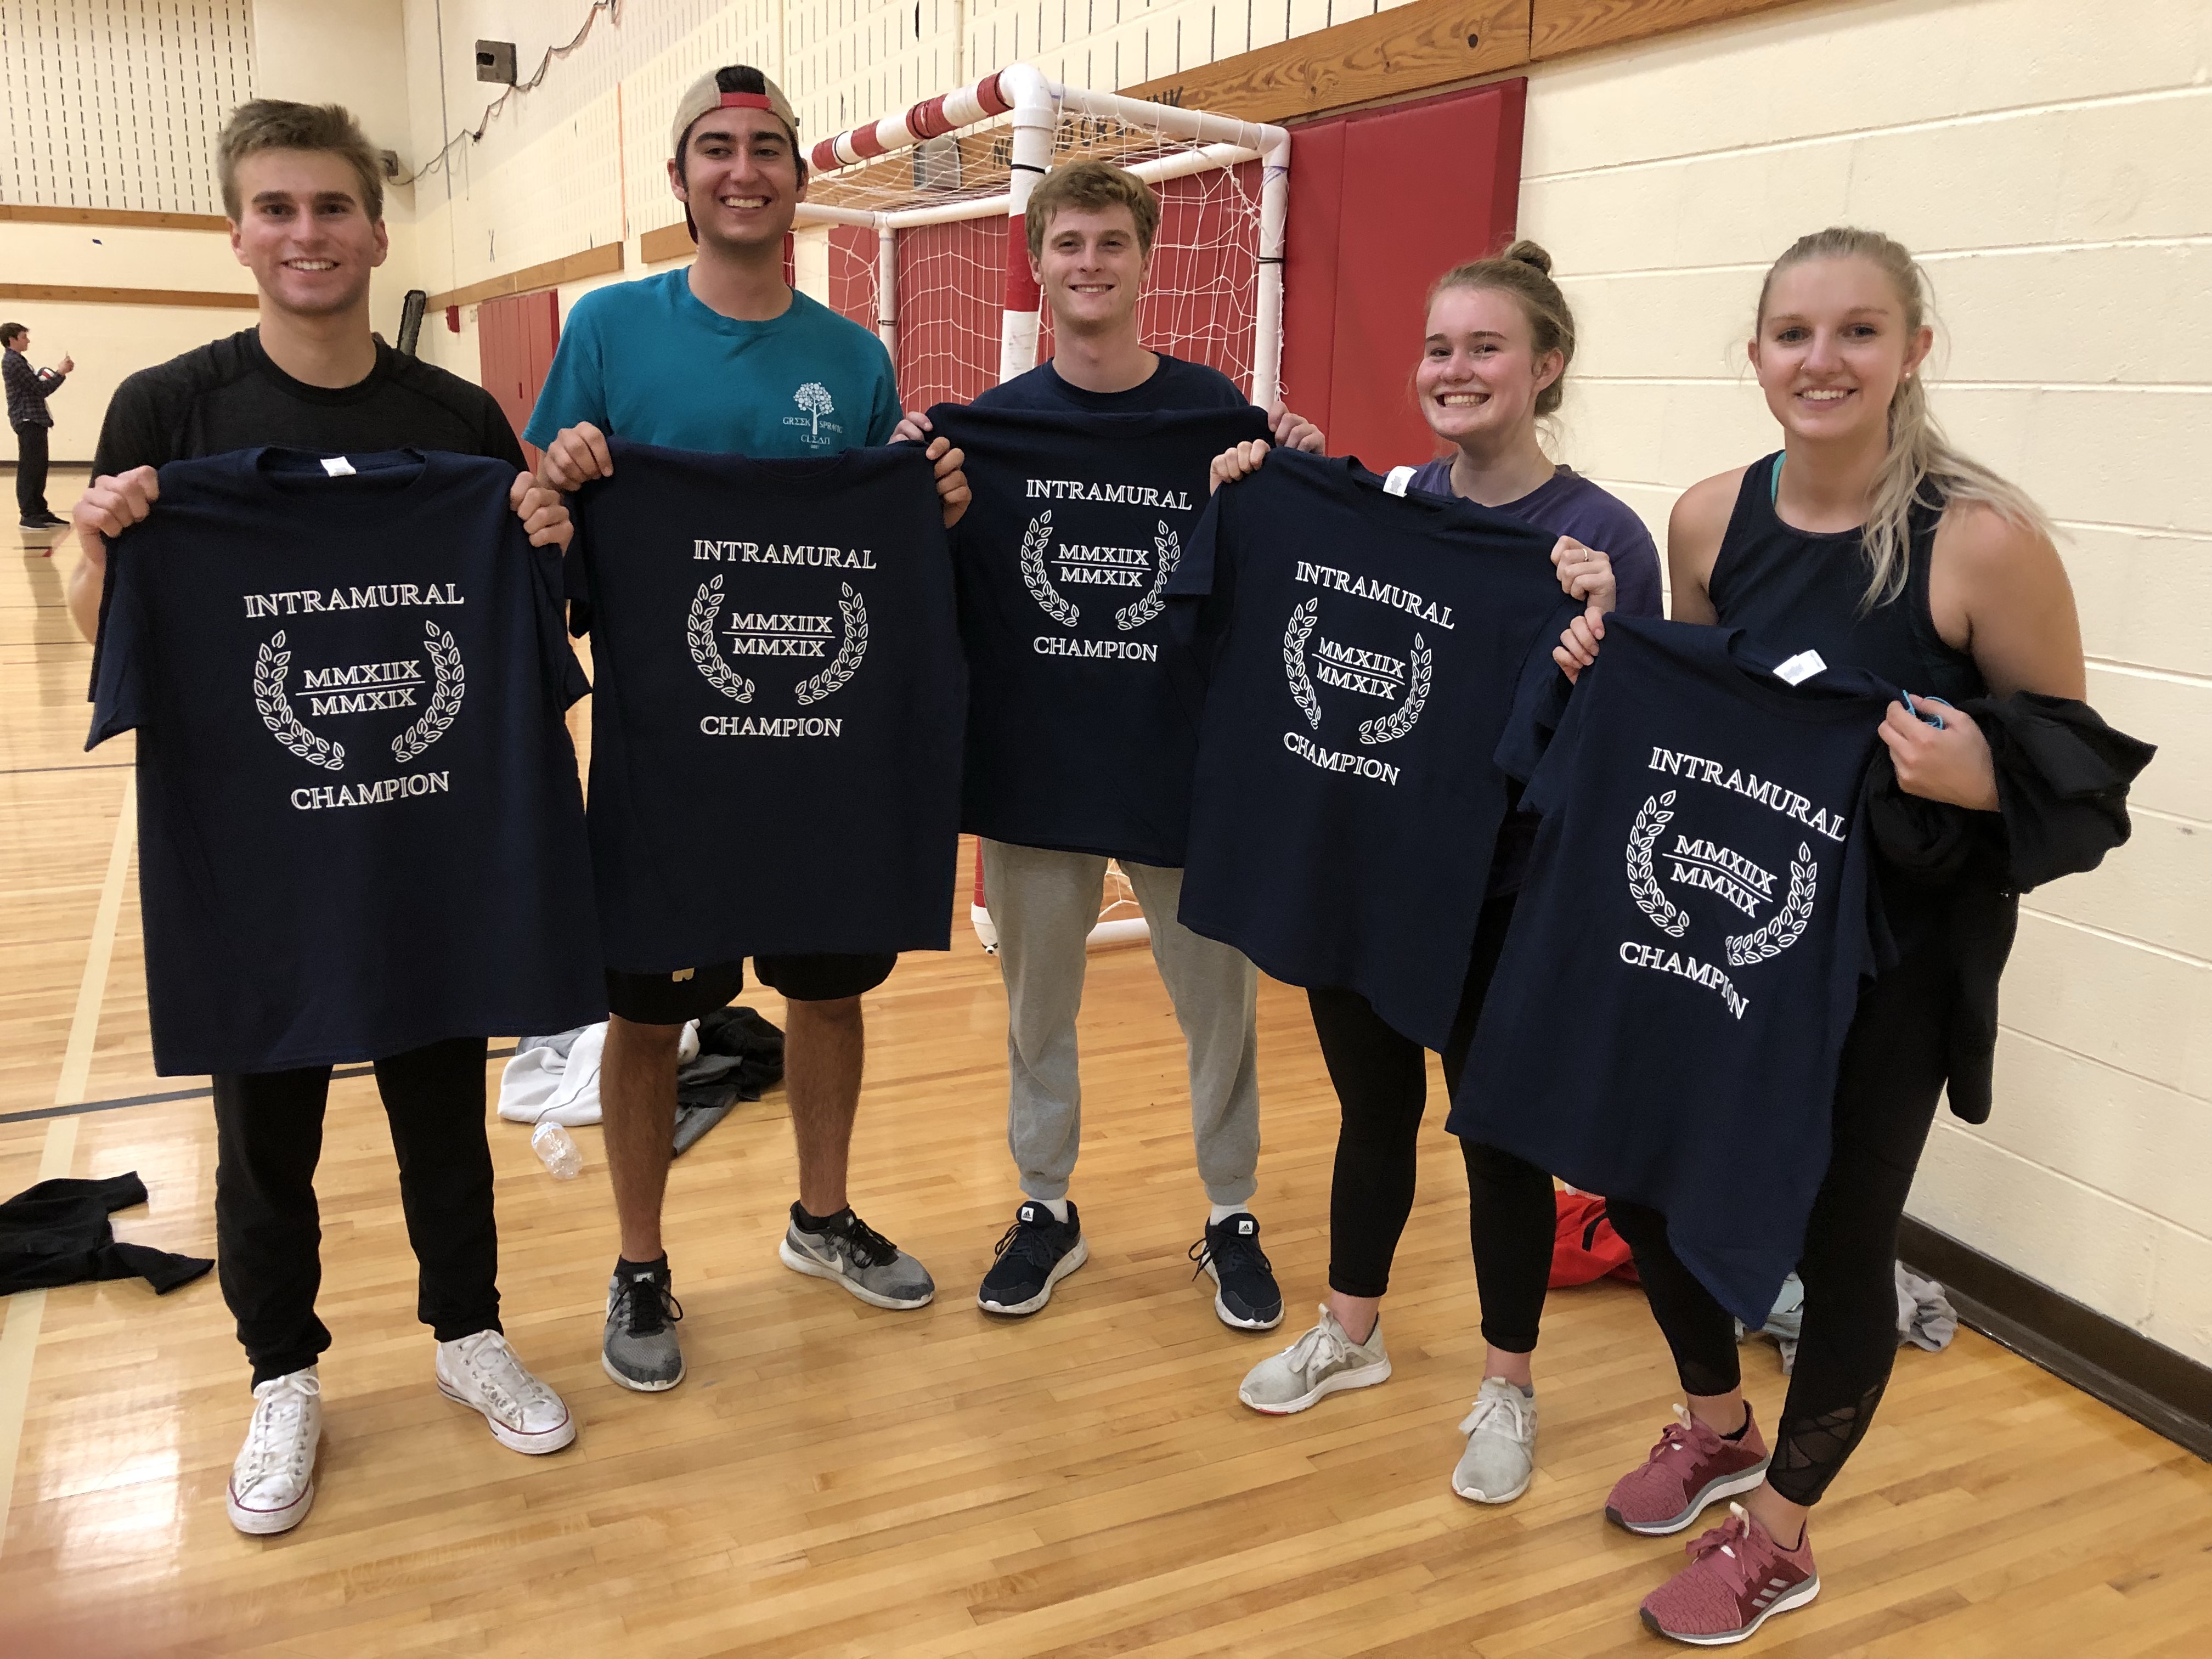 Indoor volleyball champions pose holding their Intramural shirts.